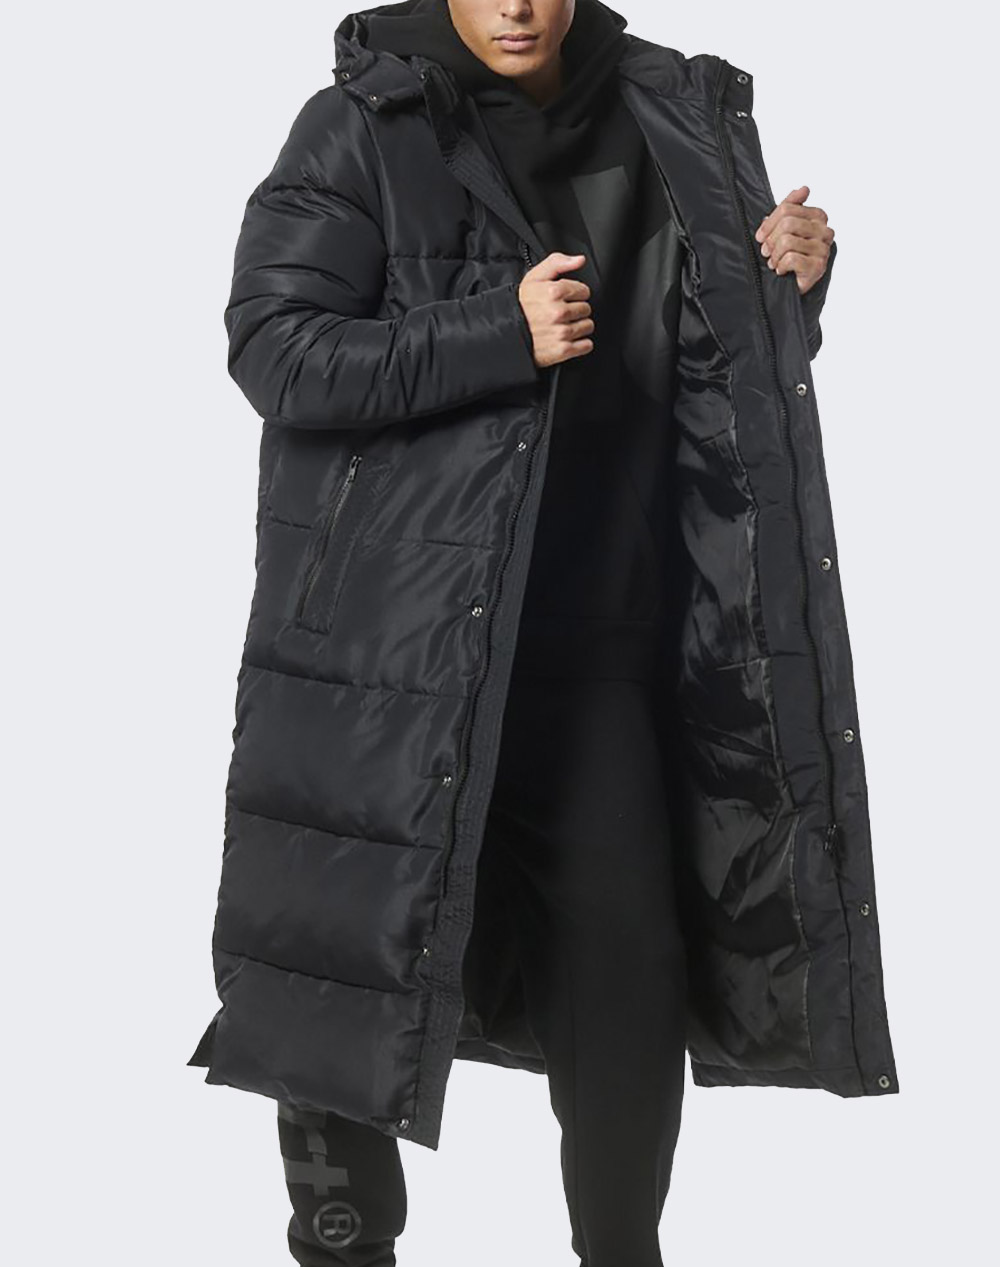 BODY ACTION GENDER NEUTRAL LONGLINE QUILTED PUFFER